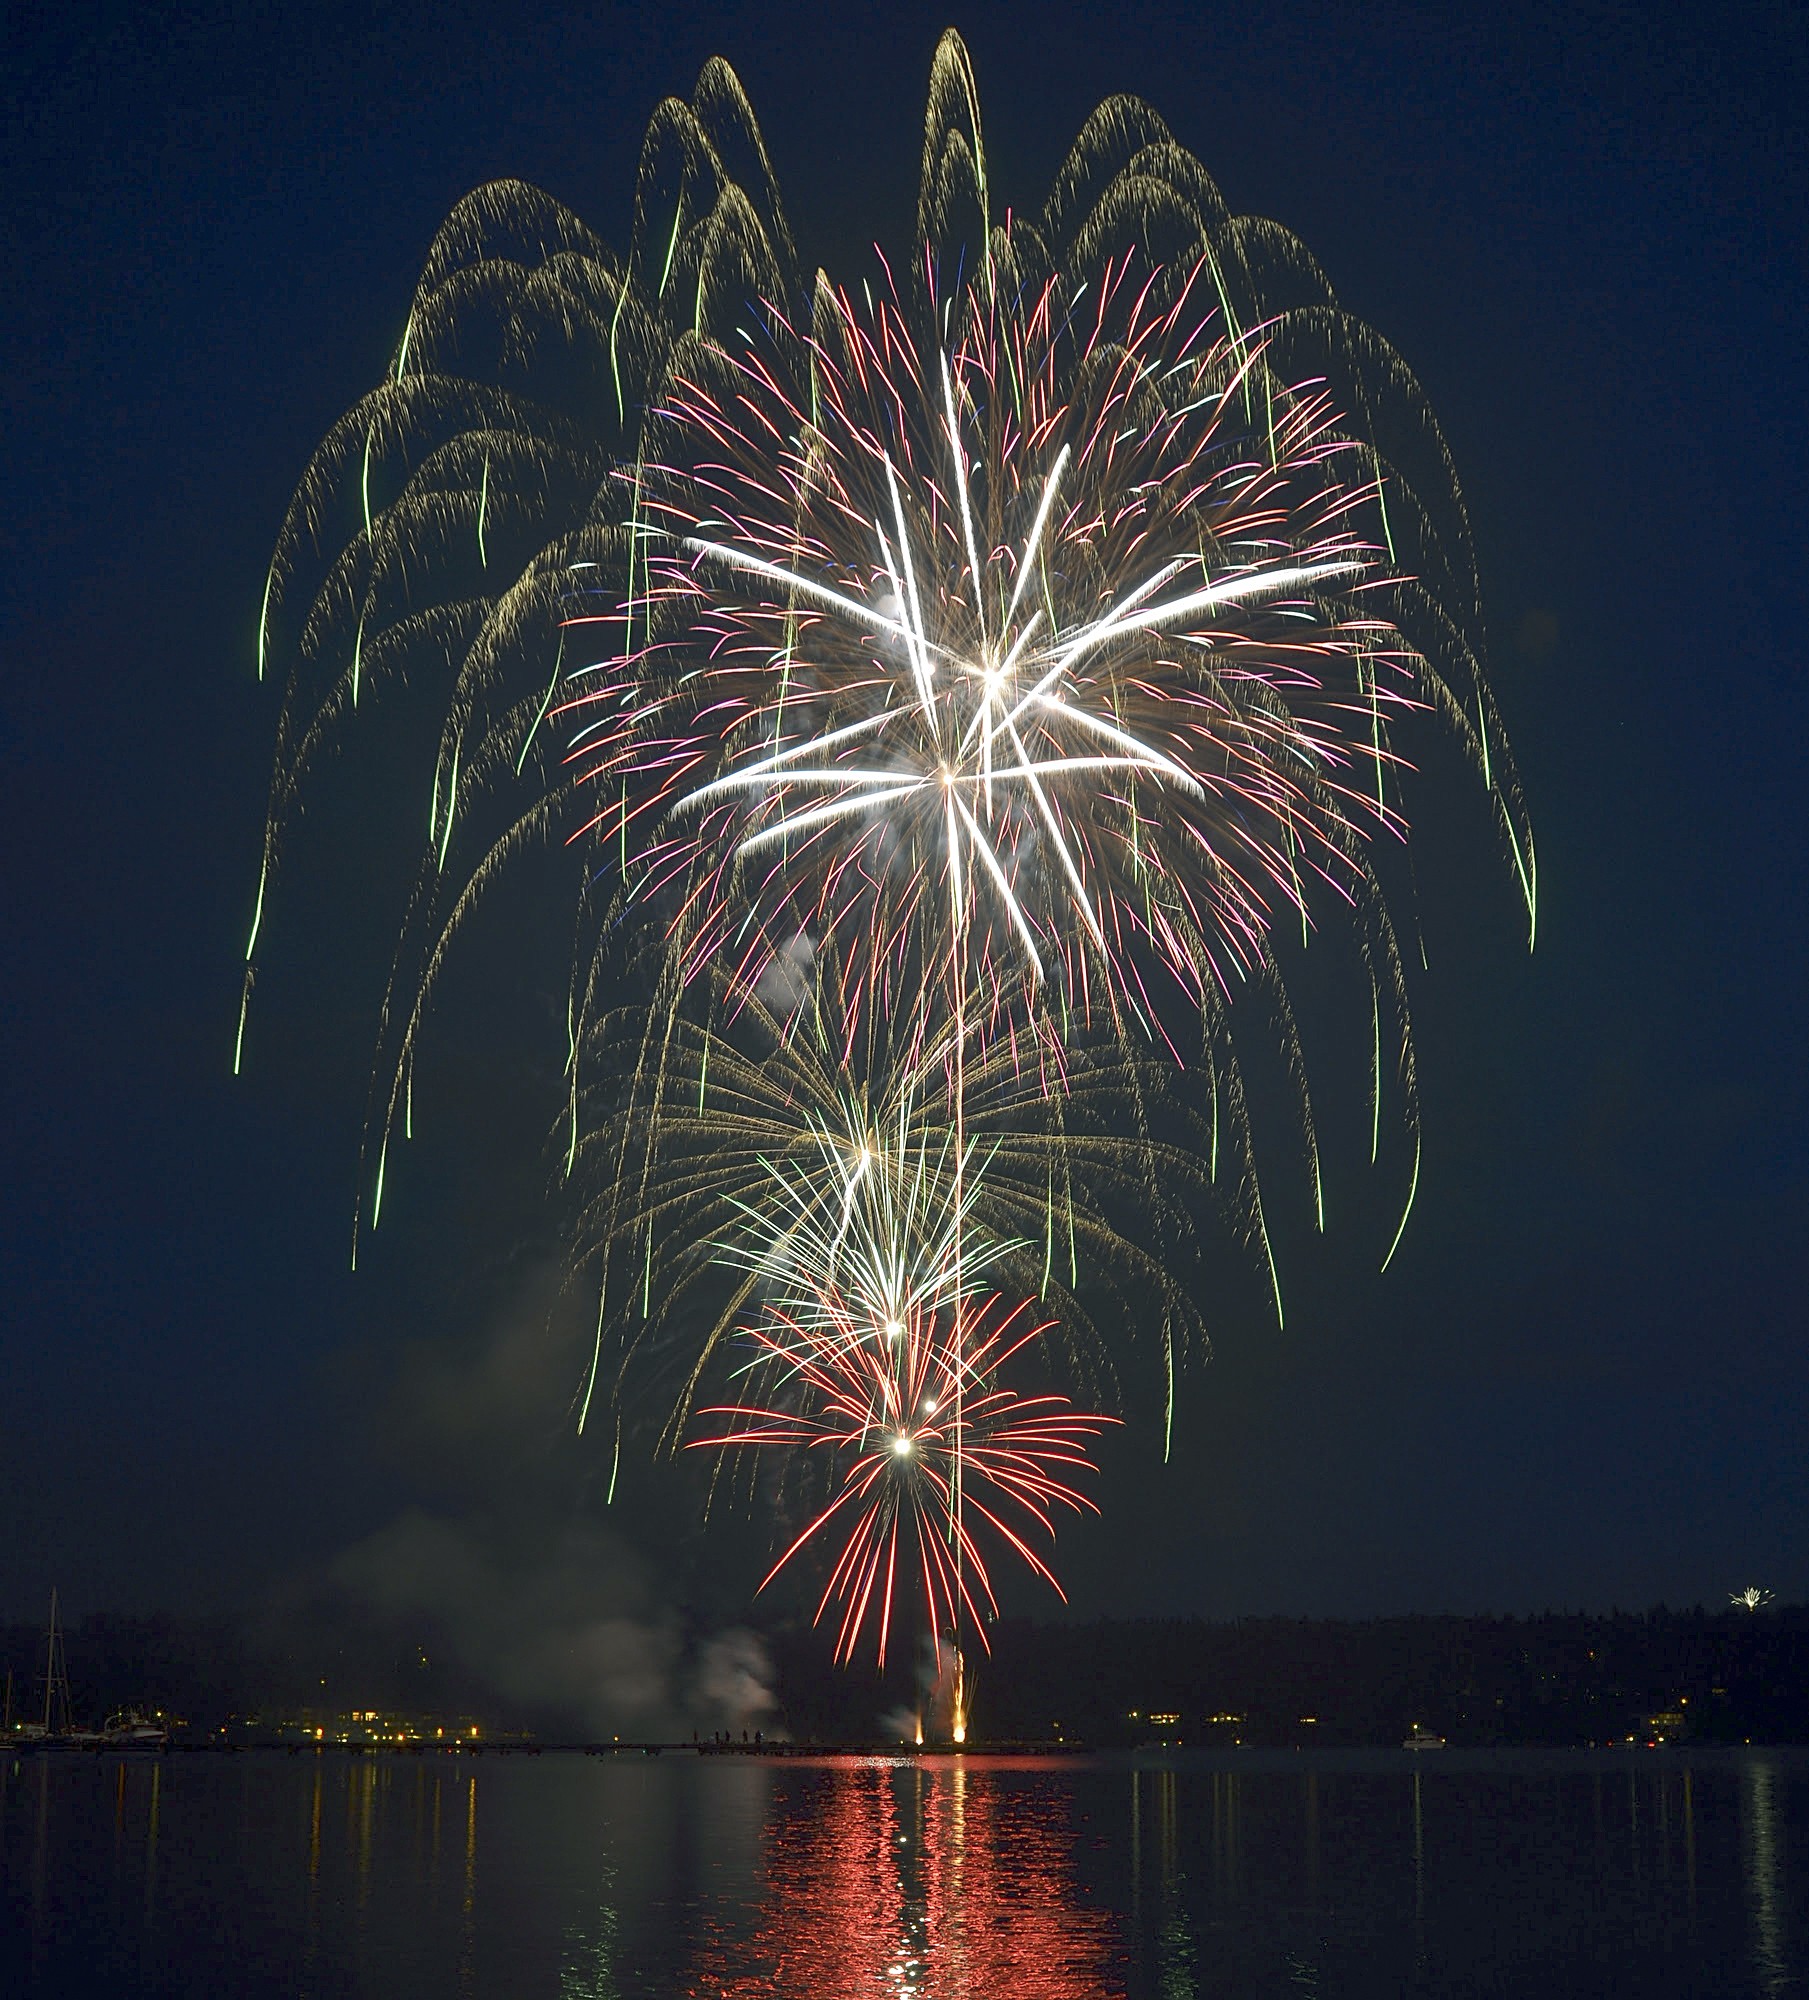 Kenmore Fireworks show is set for 10 p.m. on July 4. Contributed/Shaun McClurken